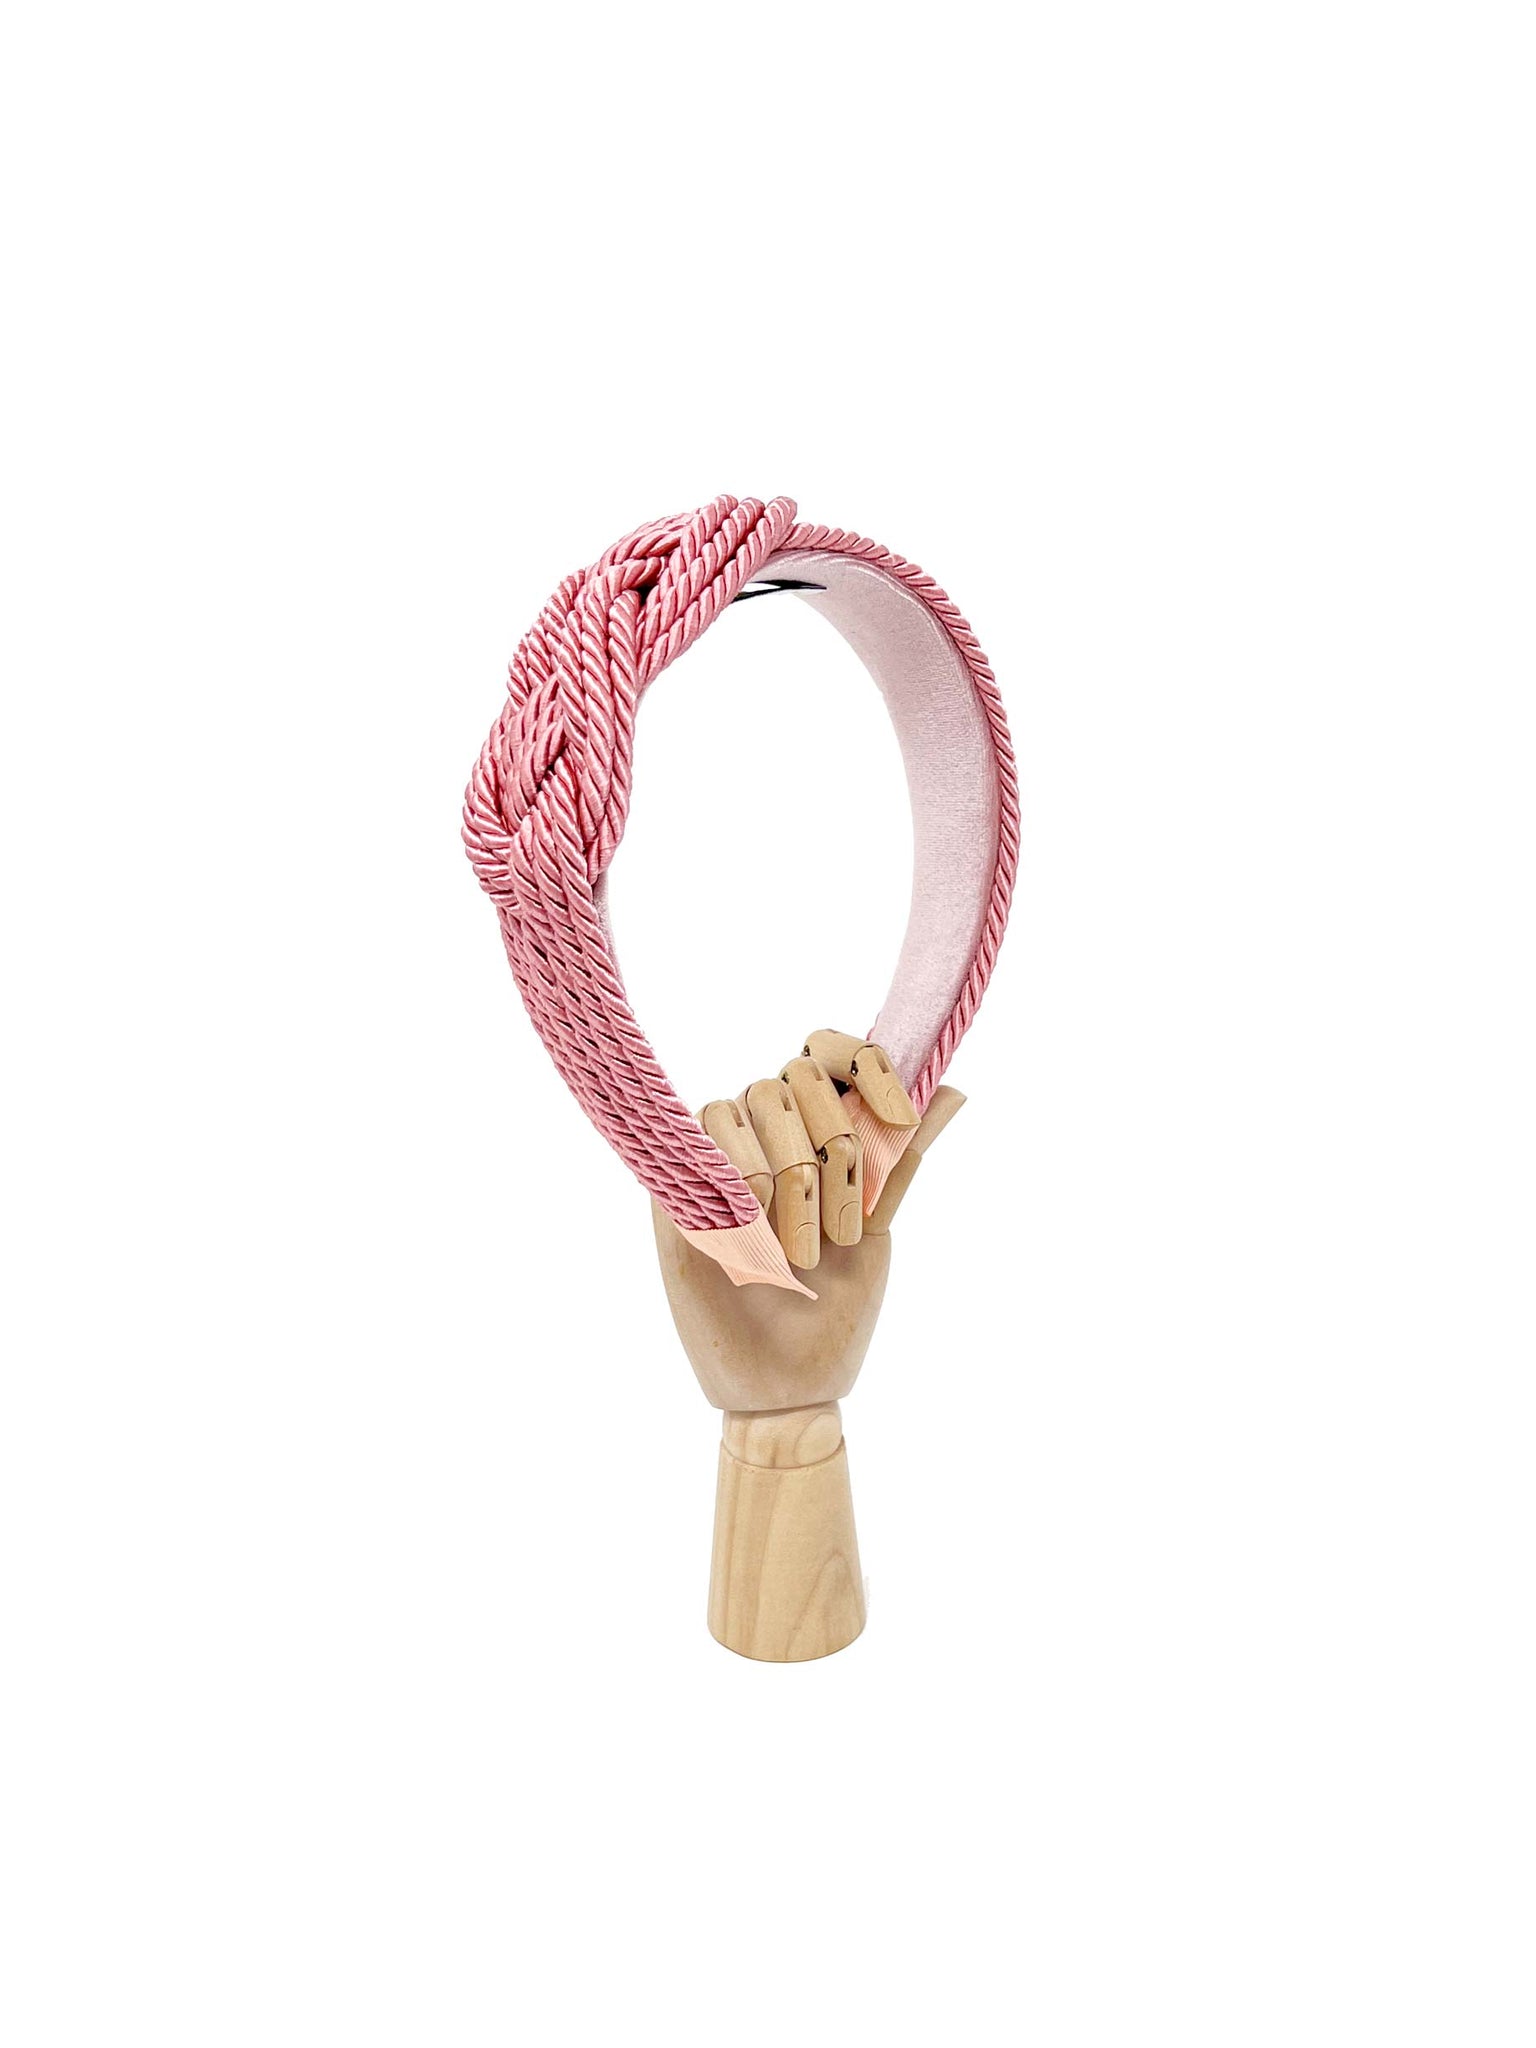 Pink three-strand hairband with side braided knot